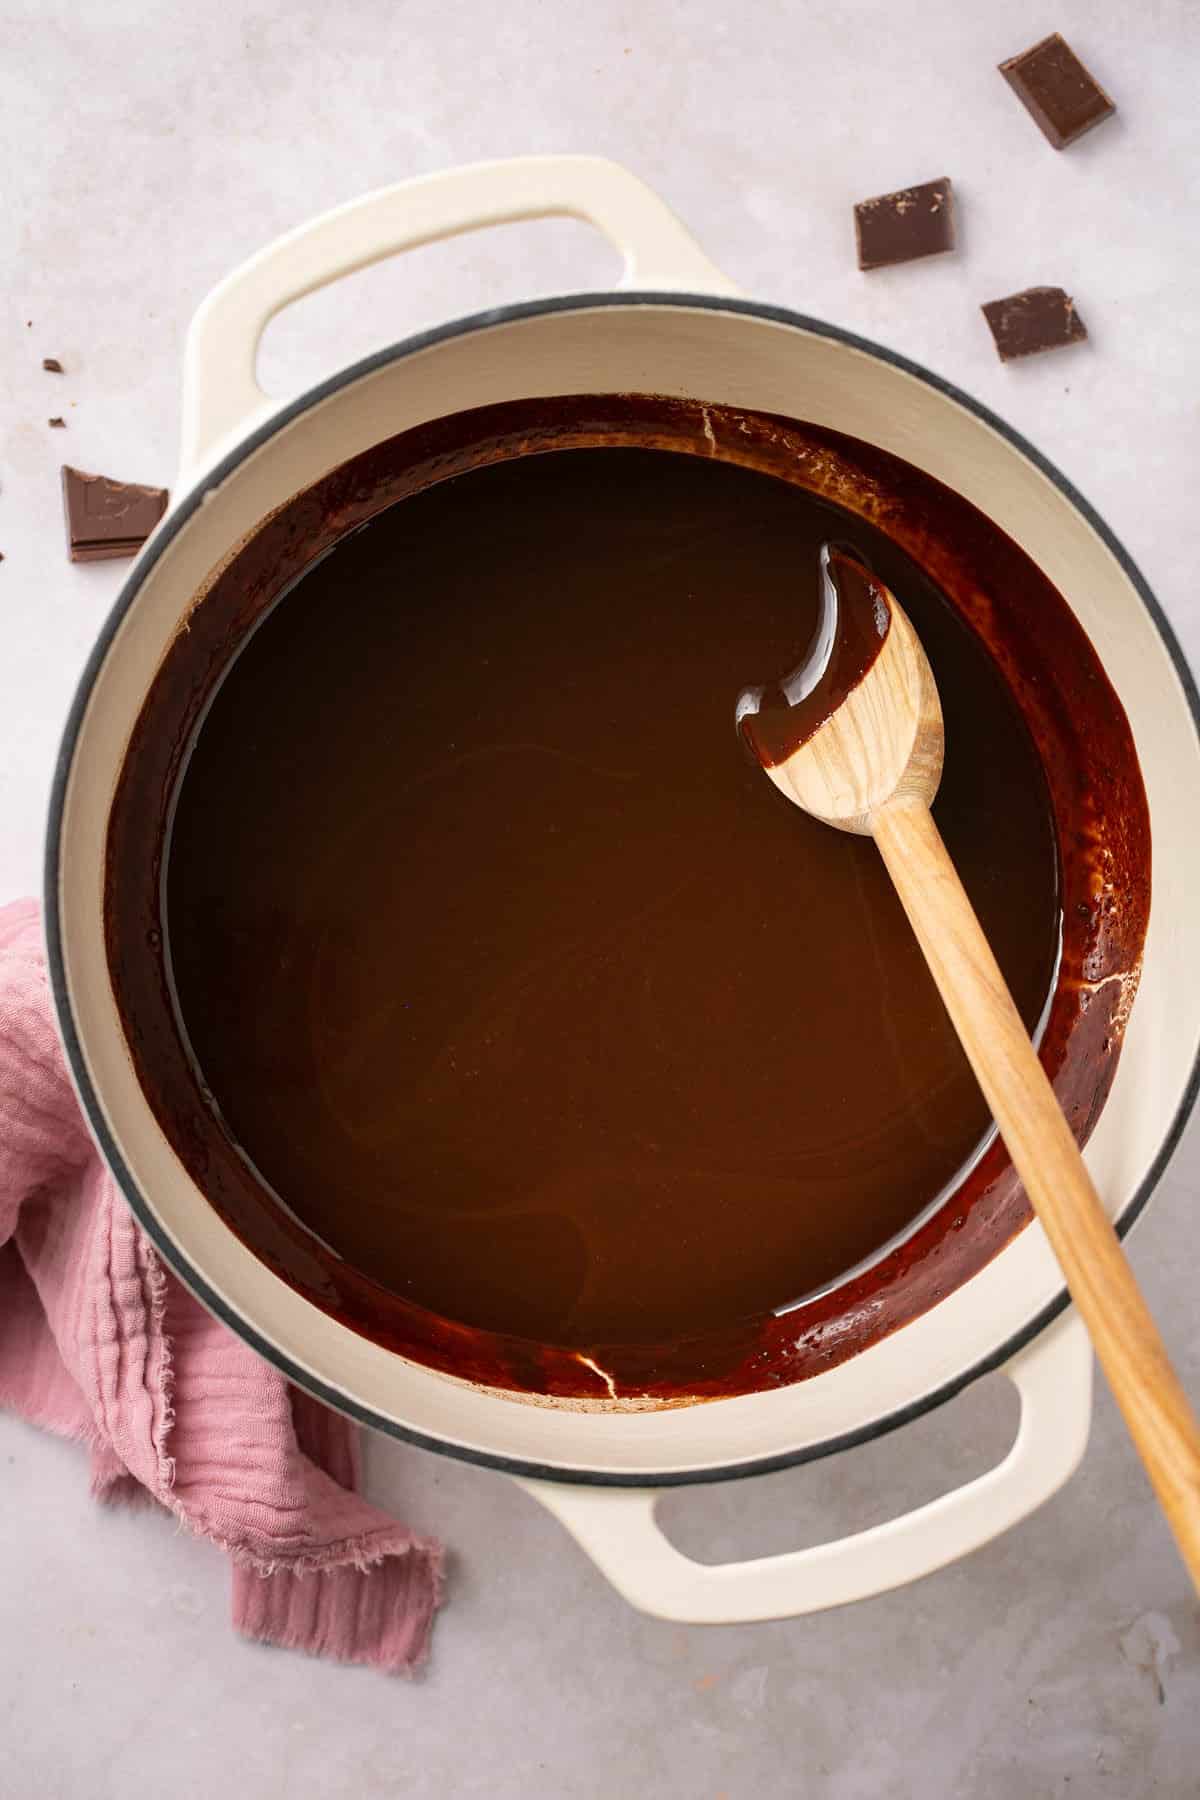 Melted chocolate in a large pot.